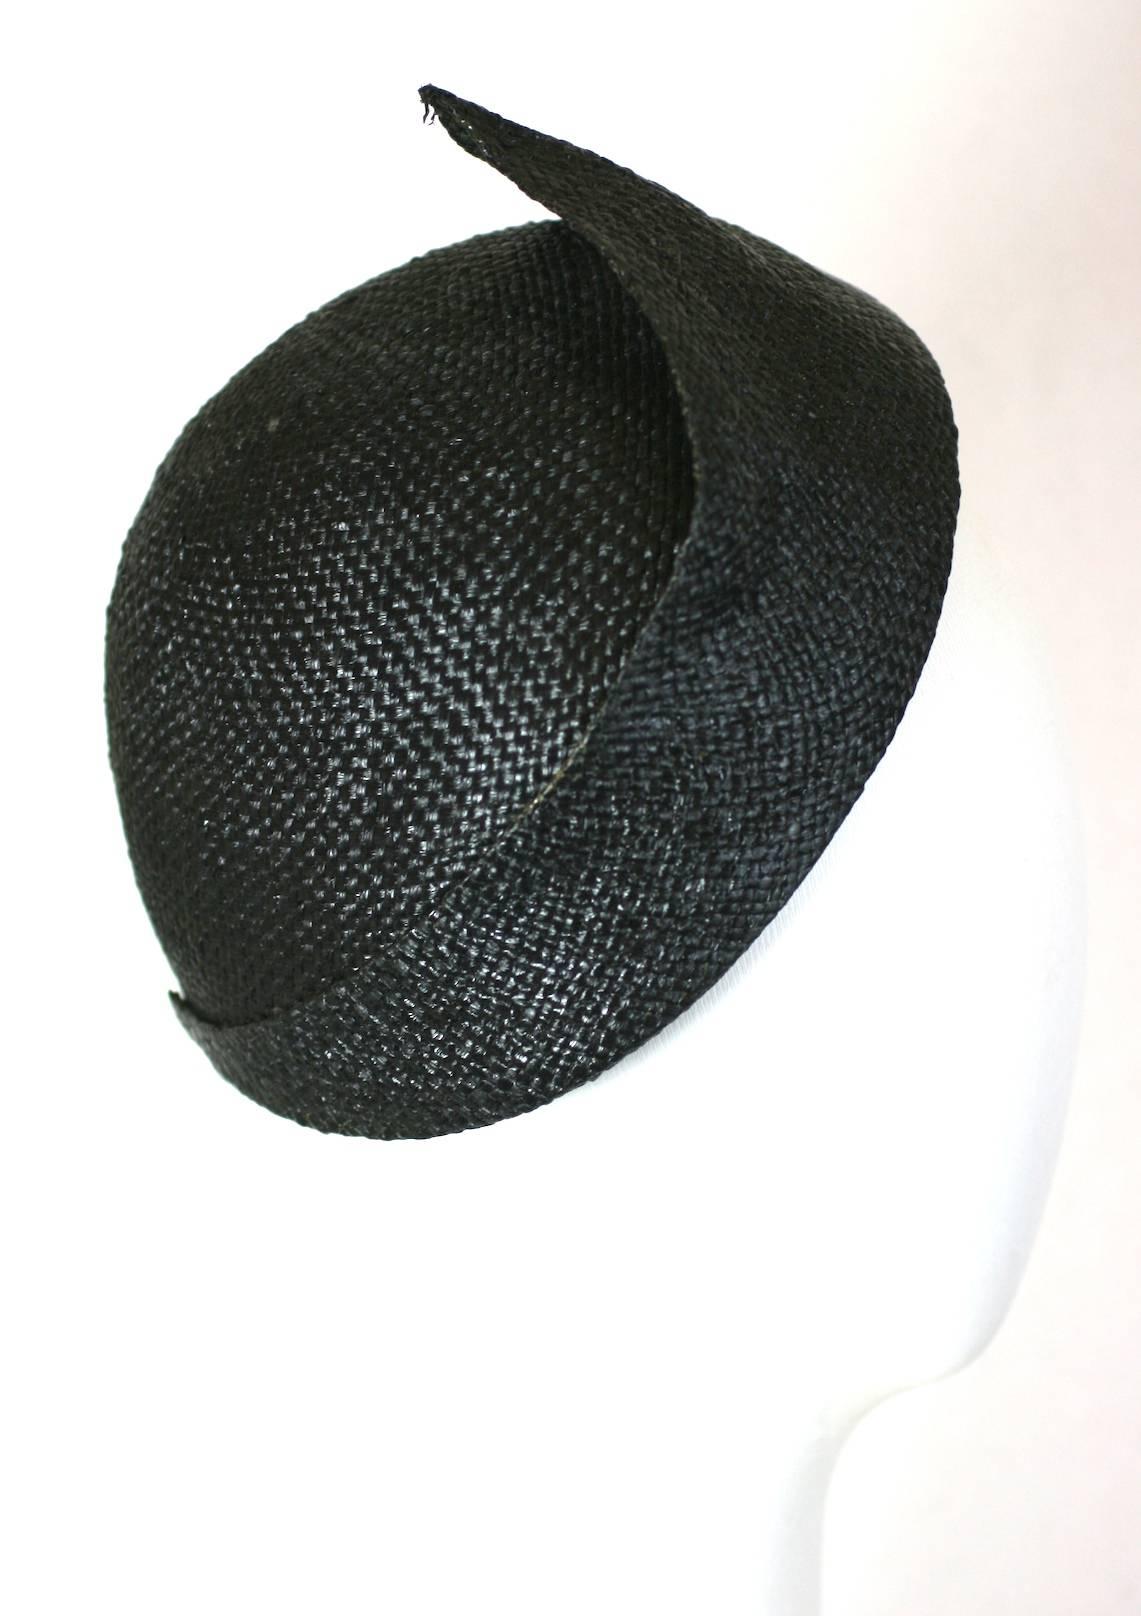 Lanvin Haute Couture  woven straw cloche hat designed by Claude Montana. The hat is inspired by an Art Deco Jeanne Lanvin cloche hat from the 1920s.
Labelled, Lanvin, France 1980's.
Excellent Condition.
Circumference at forehead 22